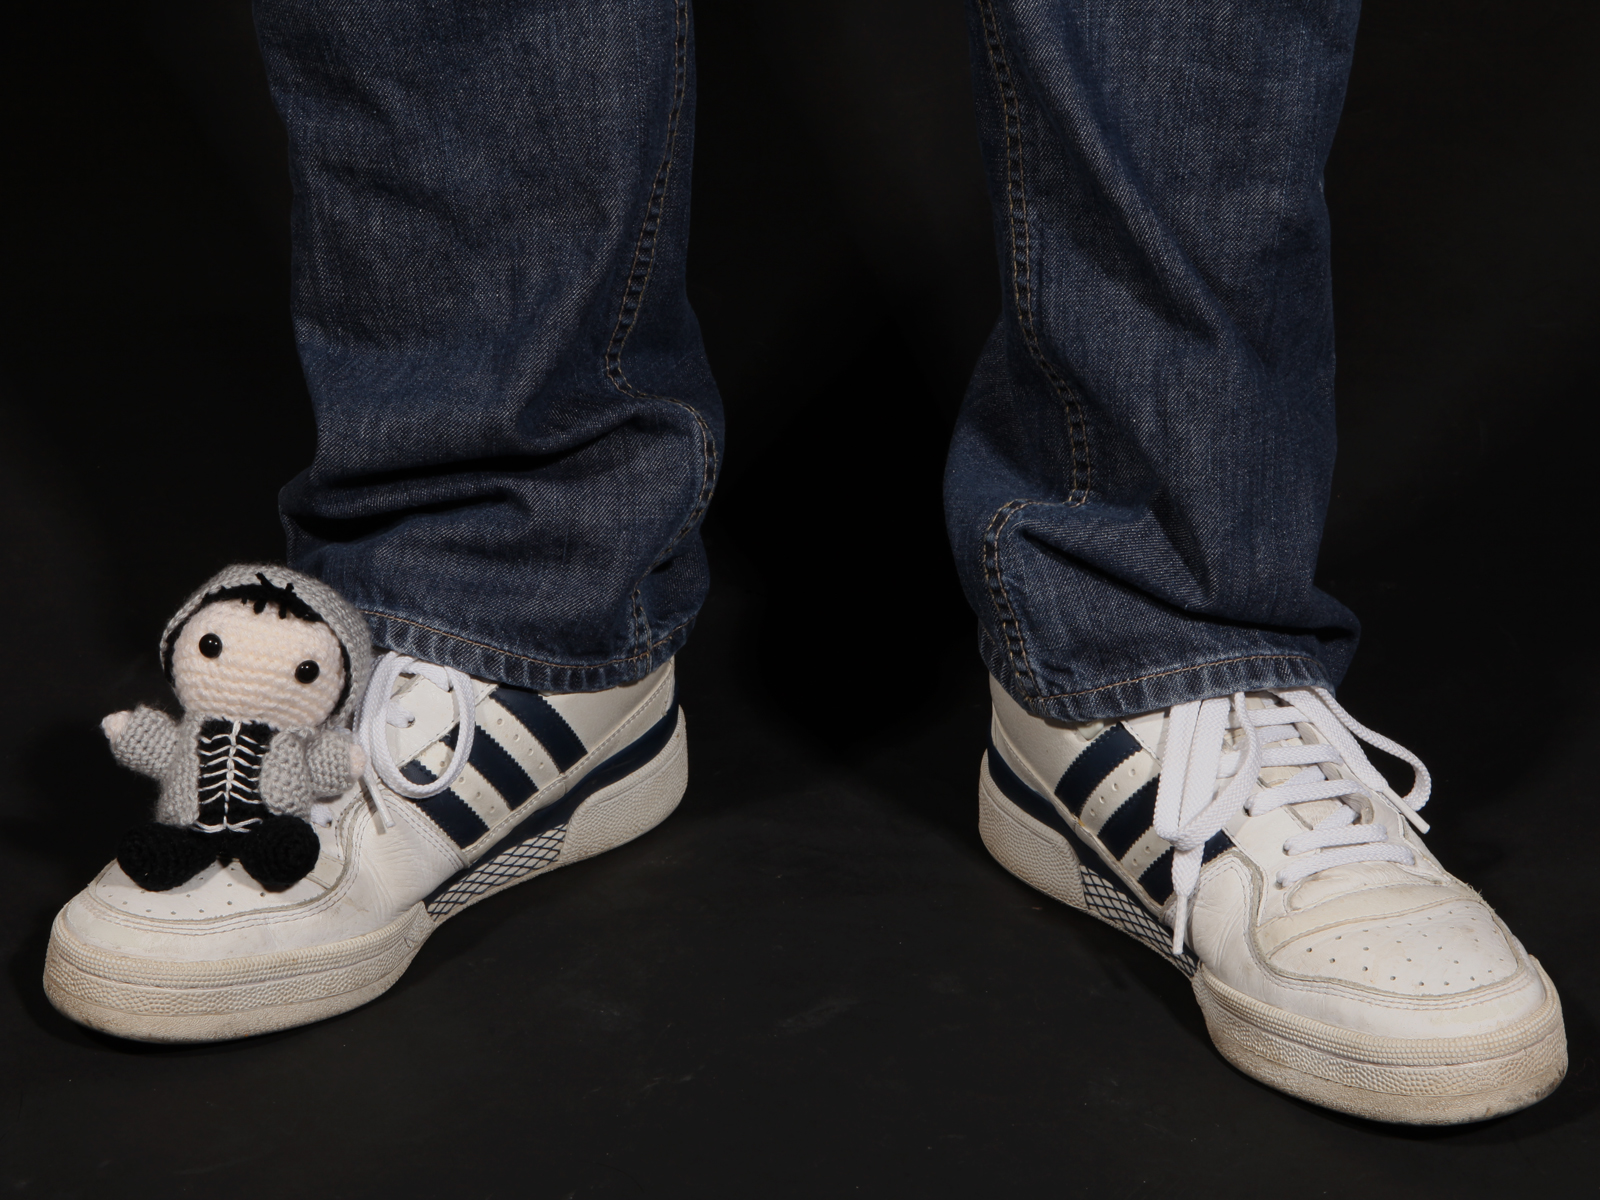 Help me find Frank the Bunny's Adidas shoes from Donnnie Darko | RPF  Costume and Prop Maker Community